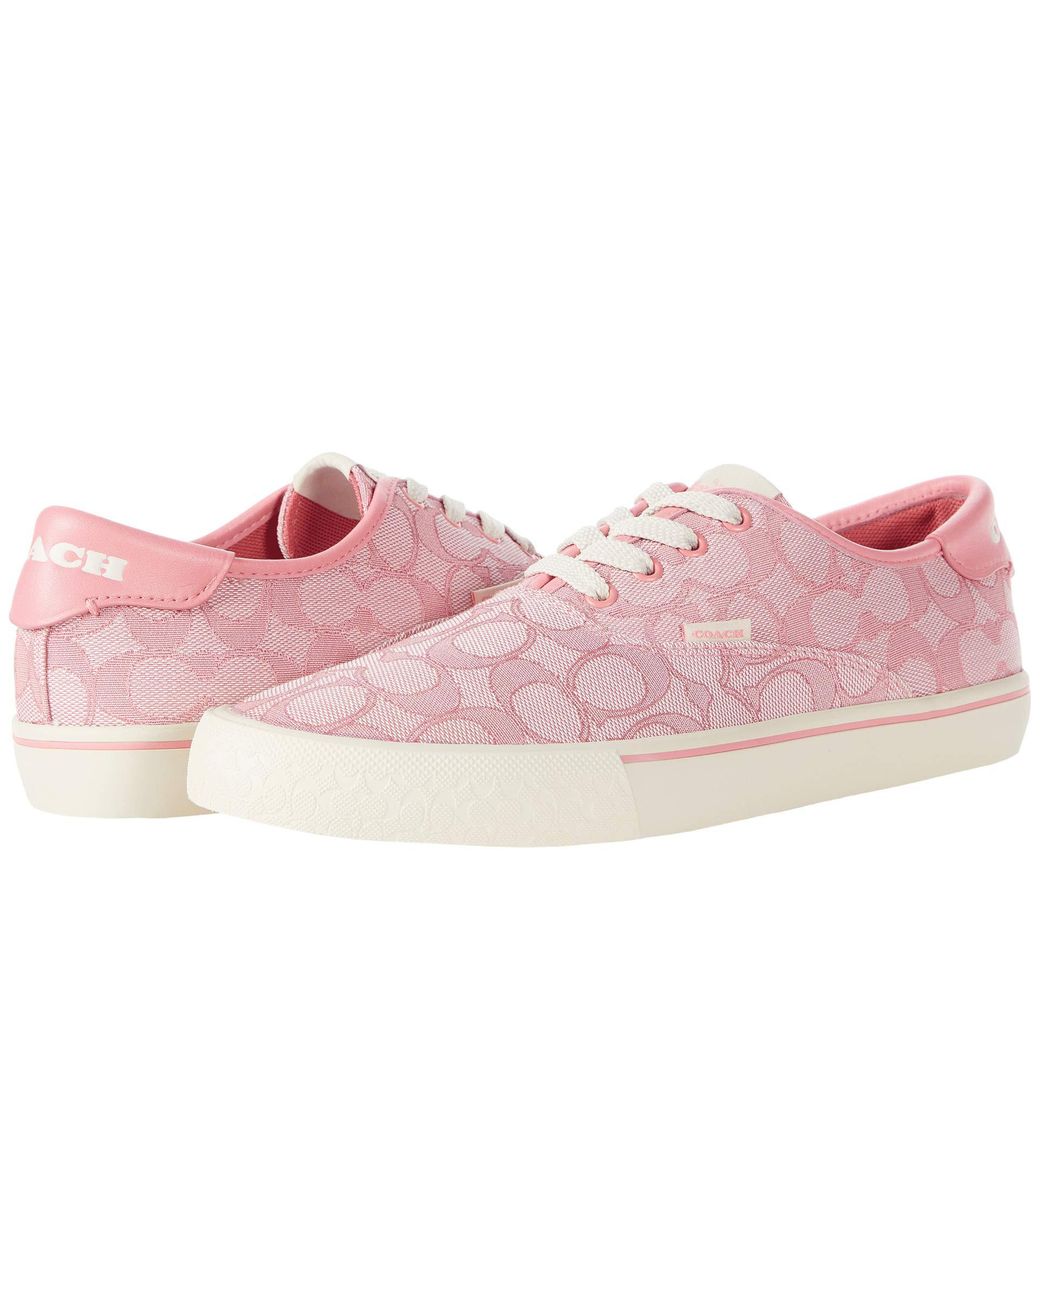 COACH Leather Citysole Skate Shoes in Pink - Lyst